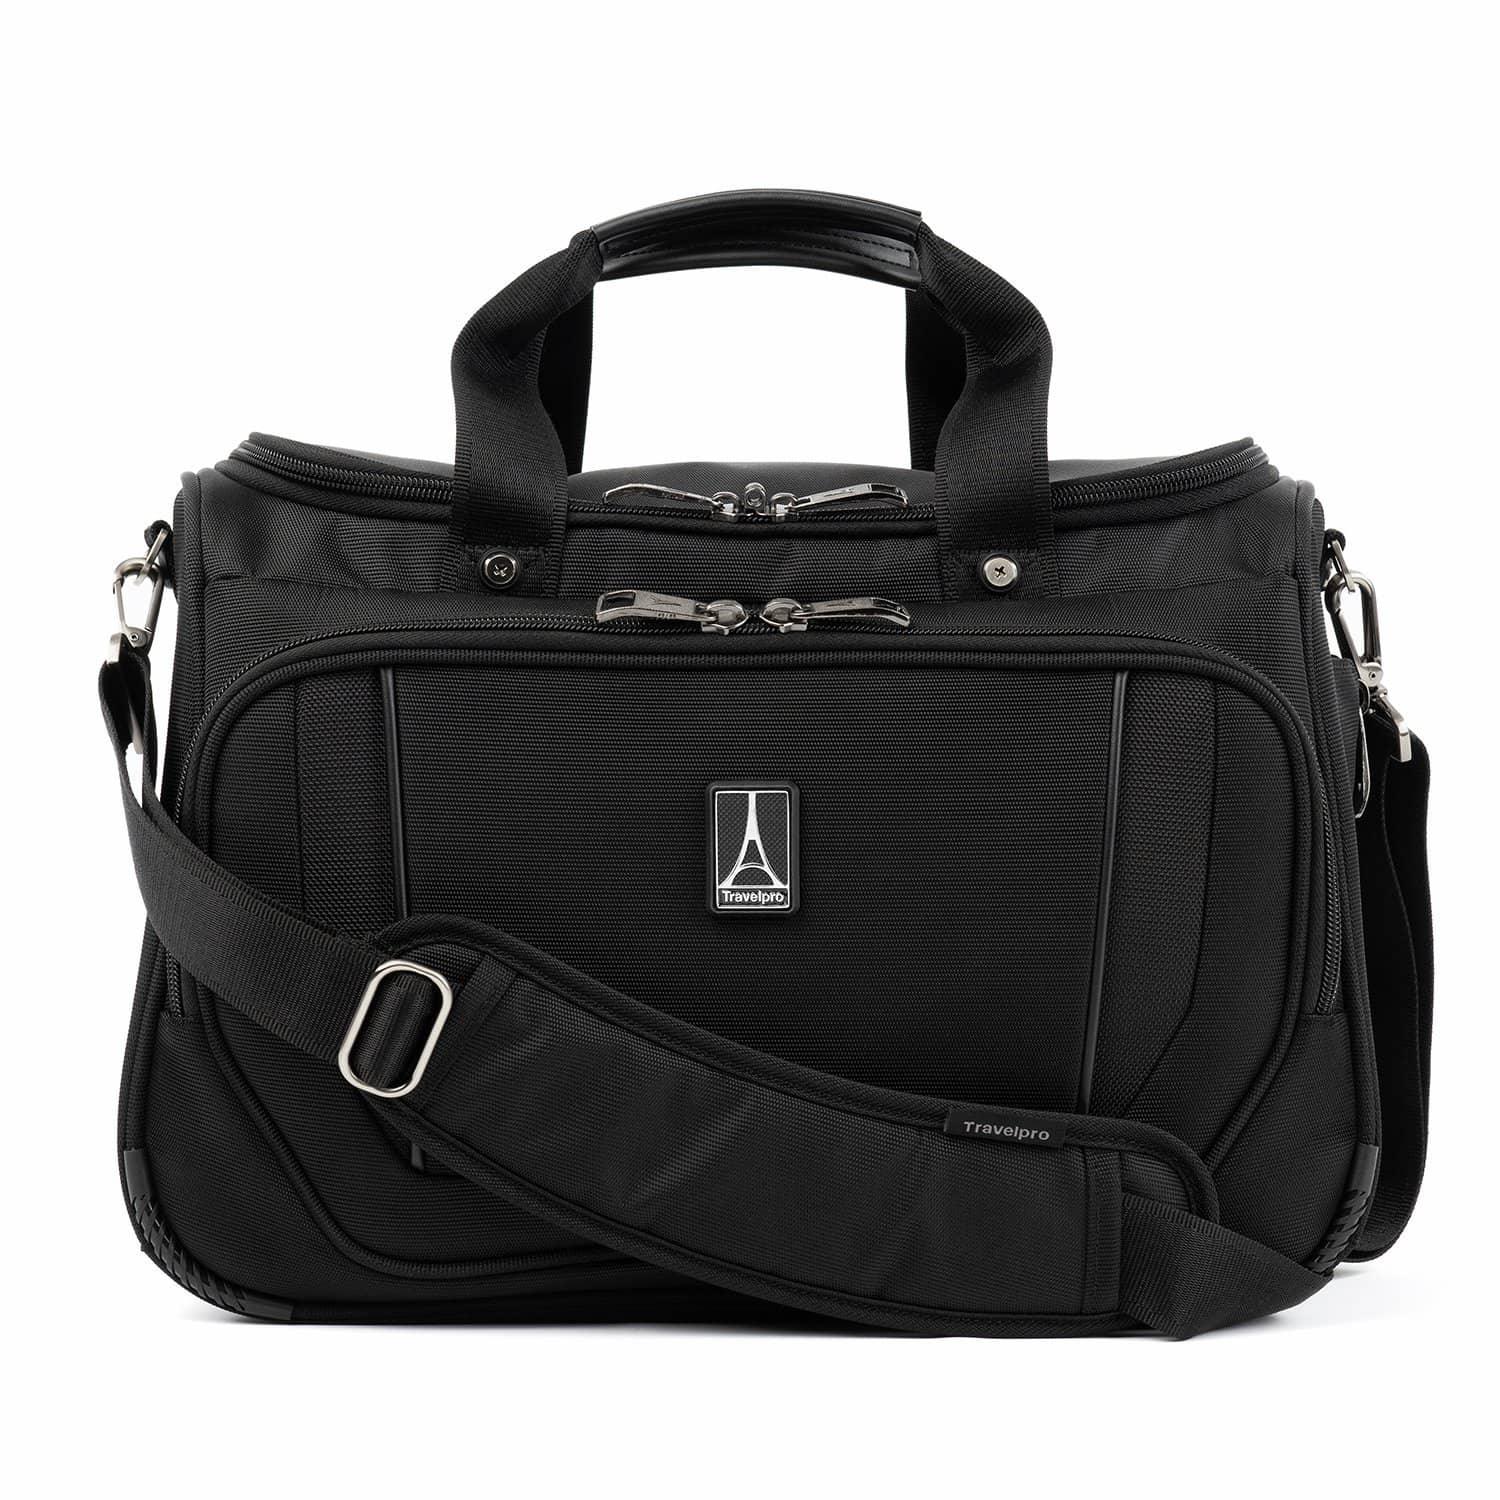 Carry-On Deluxe Tote Bag - Voyage Luggage